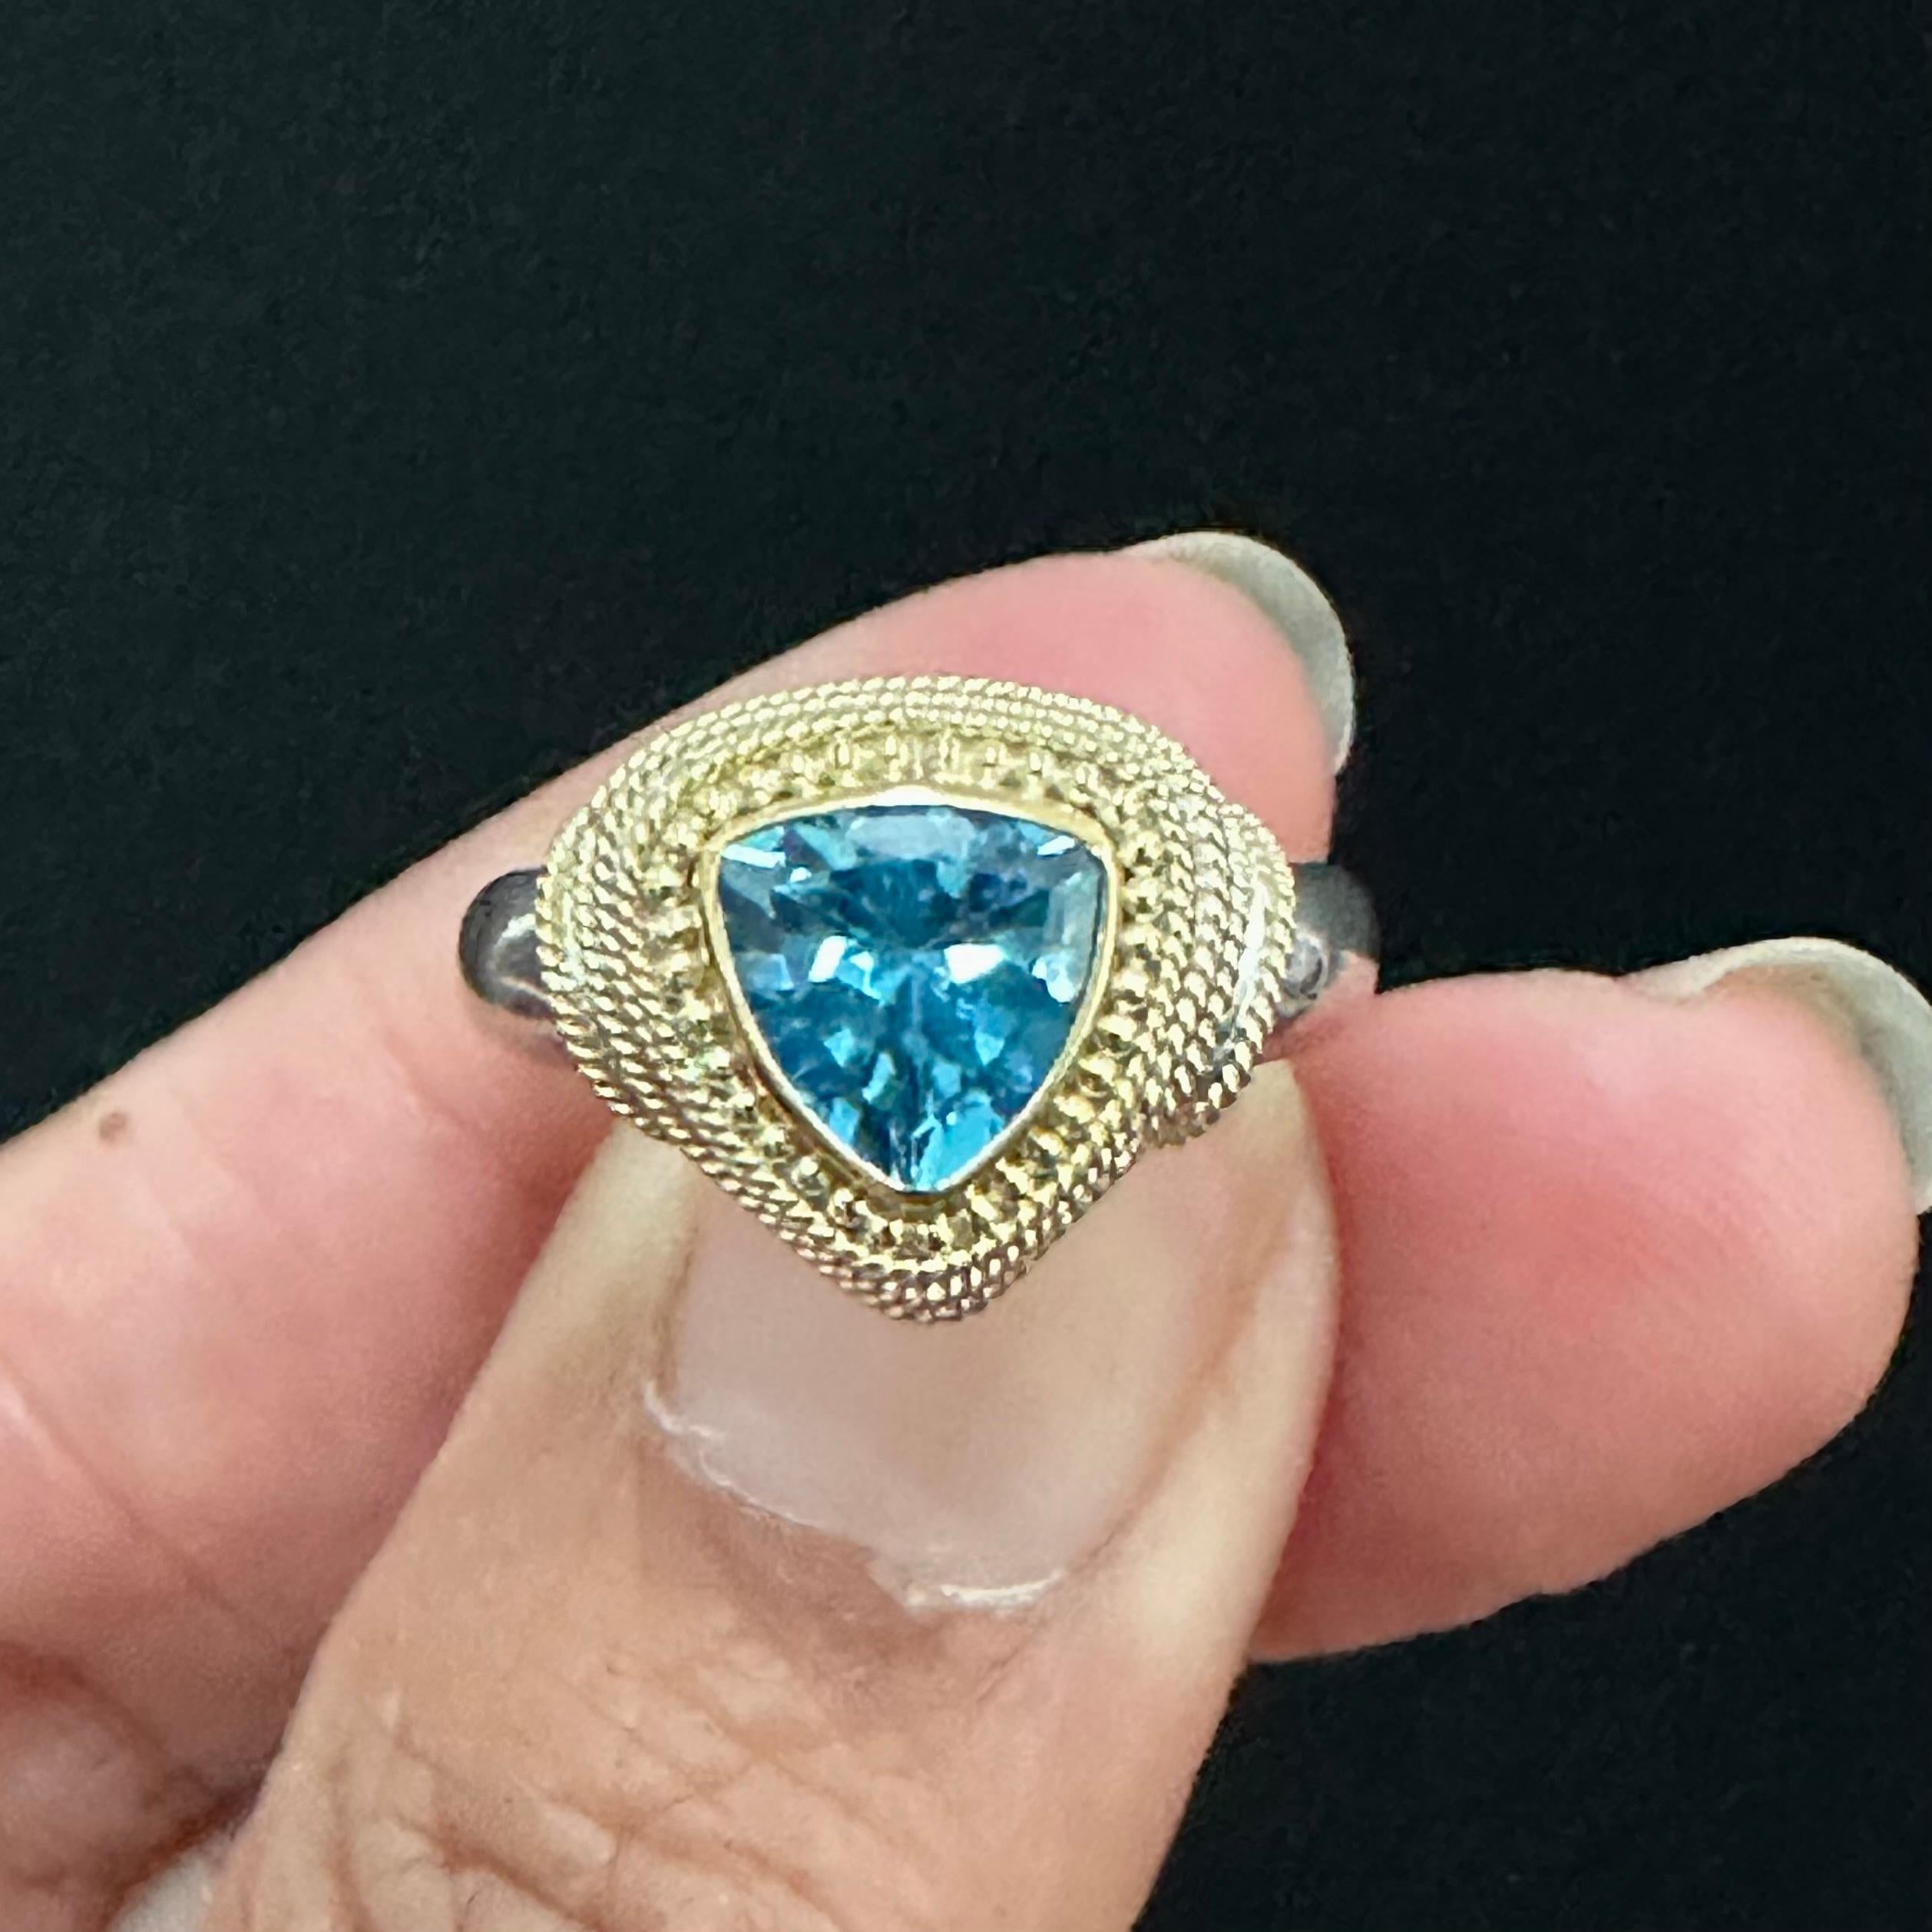 A sparkling 8 mm trillium faceted deep blue topaz is surrounded by handset 